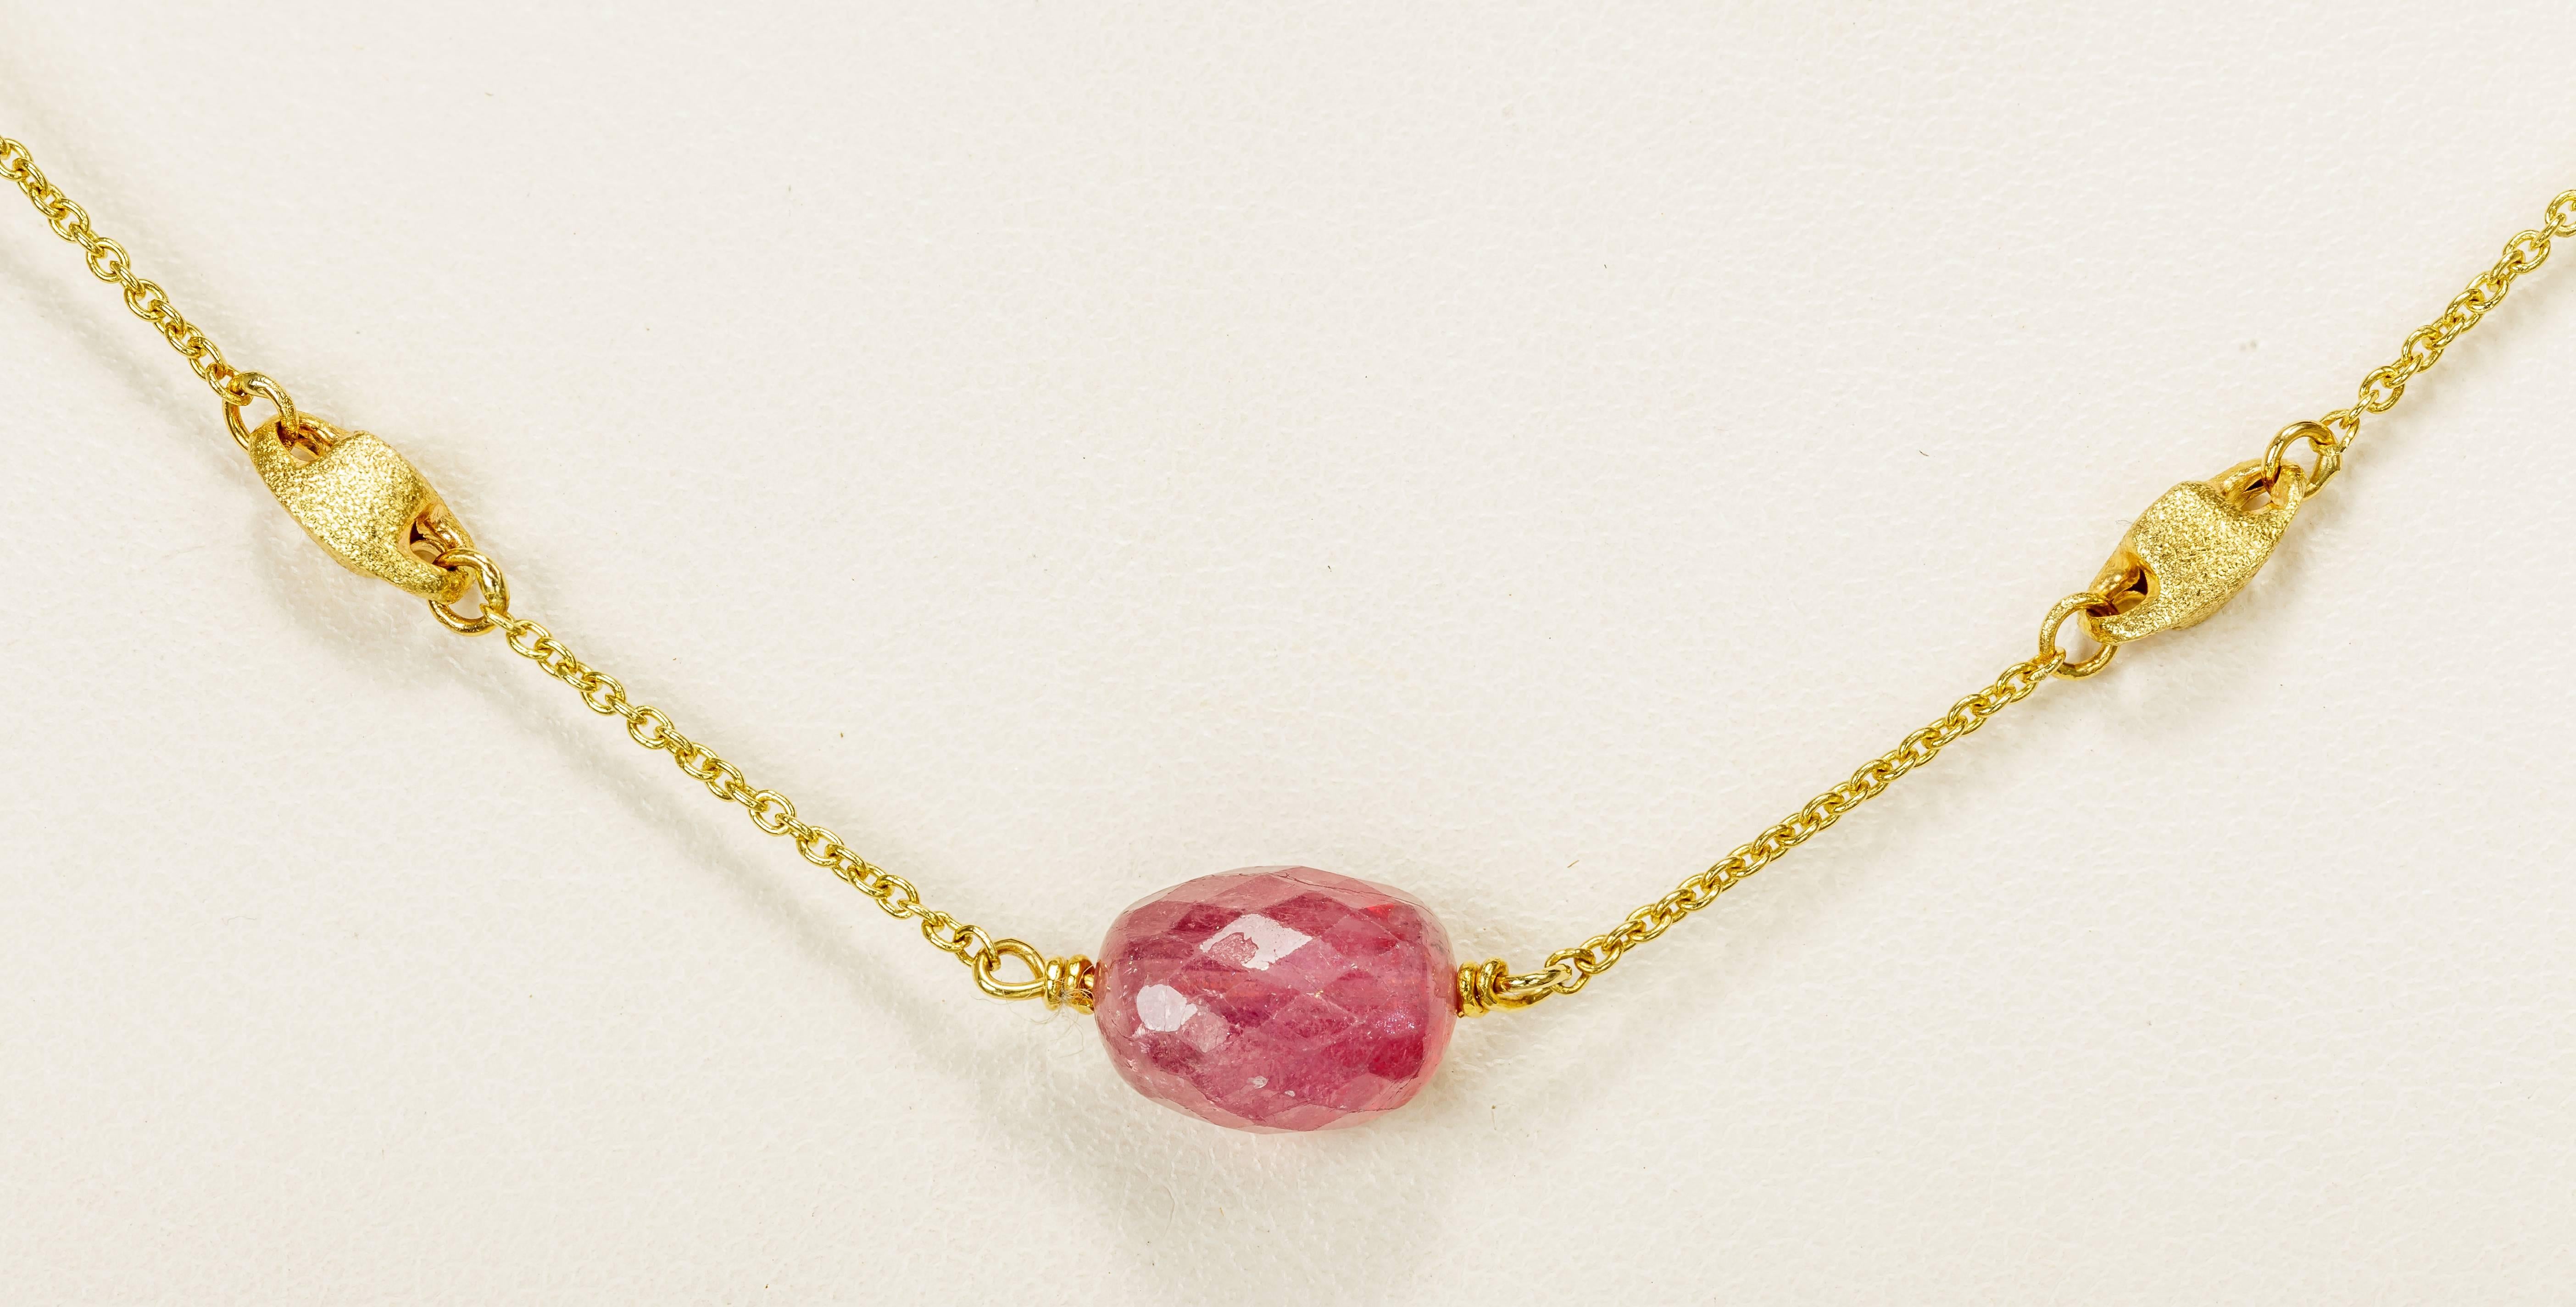 Yvel Beaded Necklace Colored Sapphire Rose Cut 18 Karat Yellow Gold 38.00 Carat In New Condition For Sale In Houston, TX